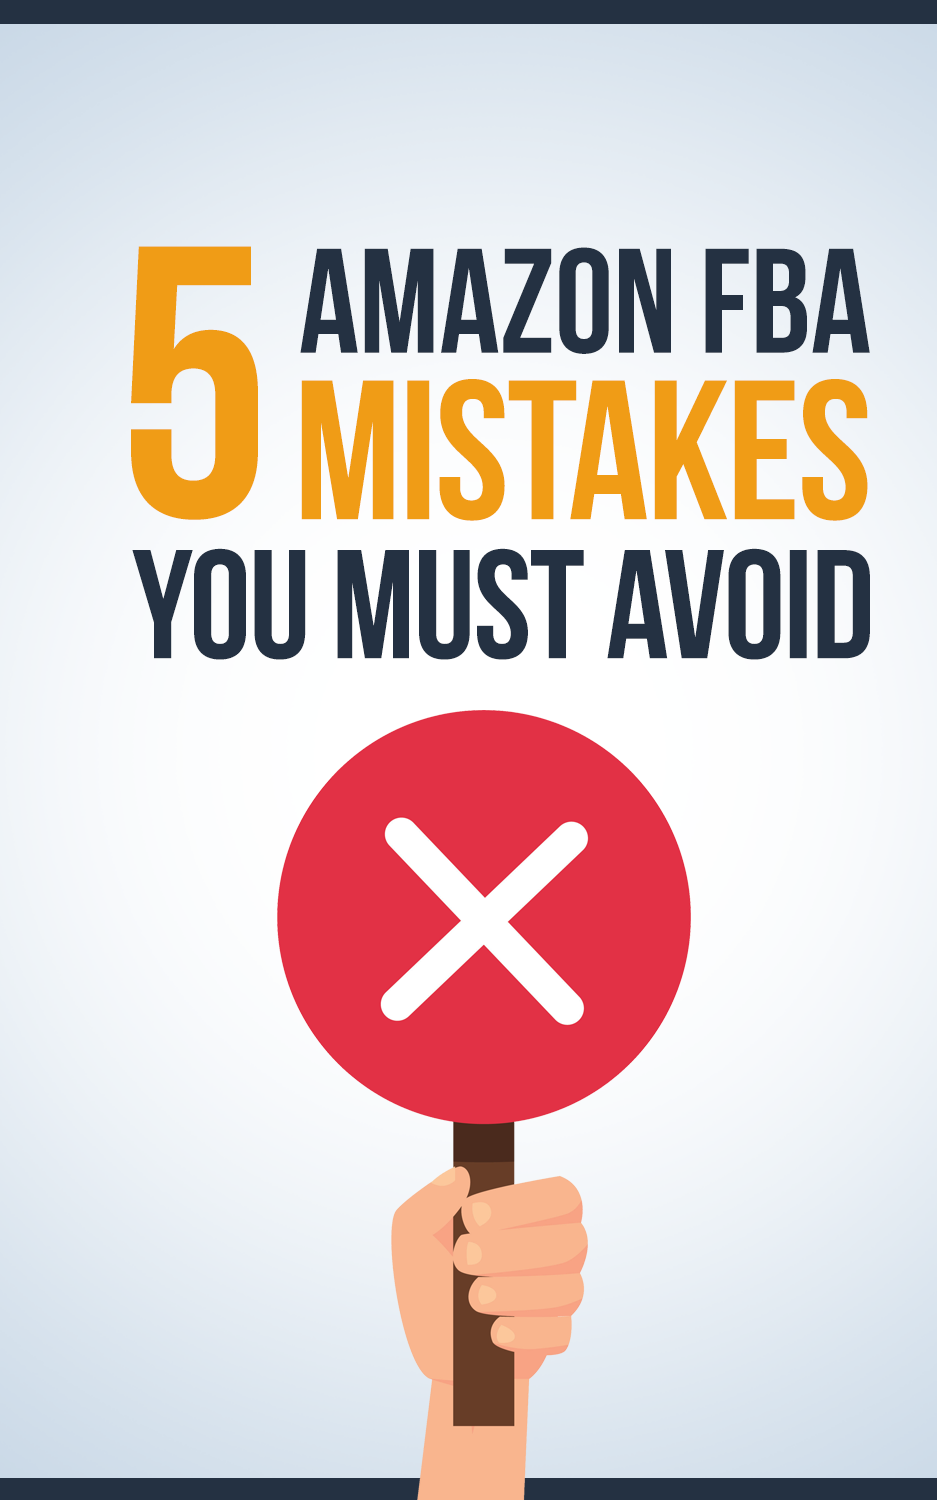 5 Amazon FBA Mistakes You Must Avoid  ( FREE DOWNLOAD )